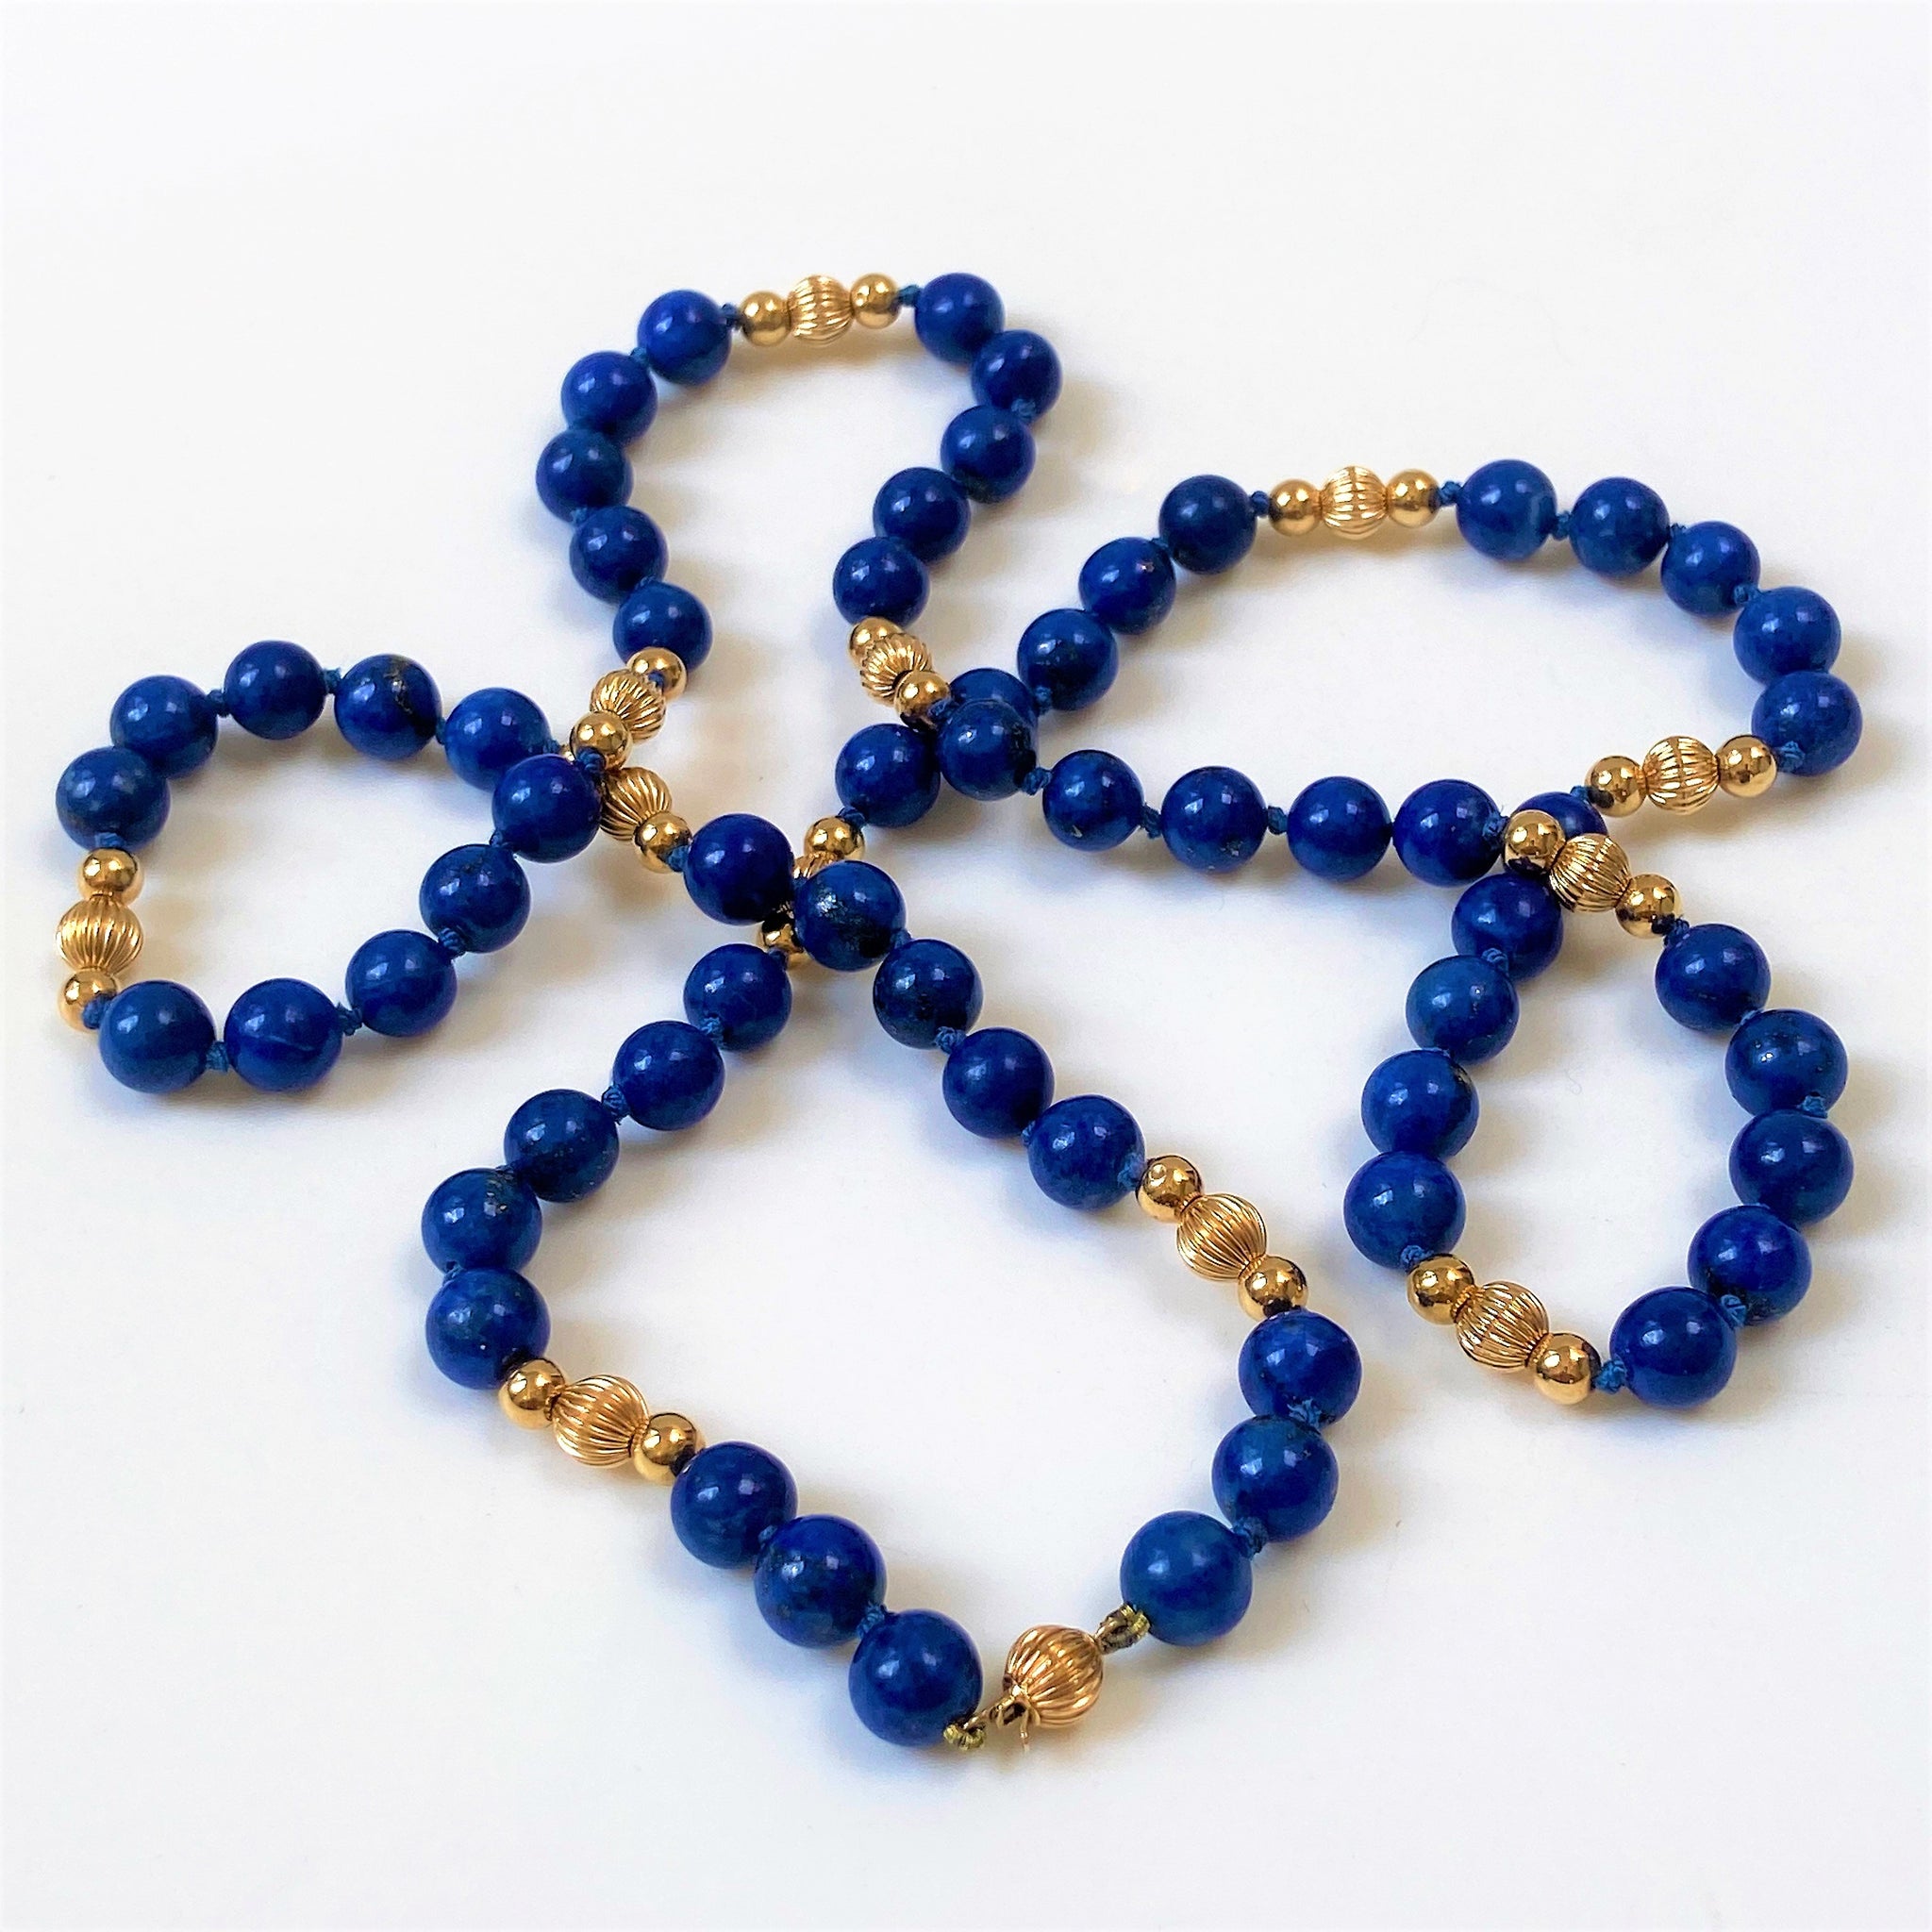 14ct Gold and Lapis Lazuli Bead Necklace